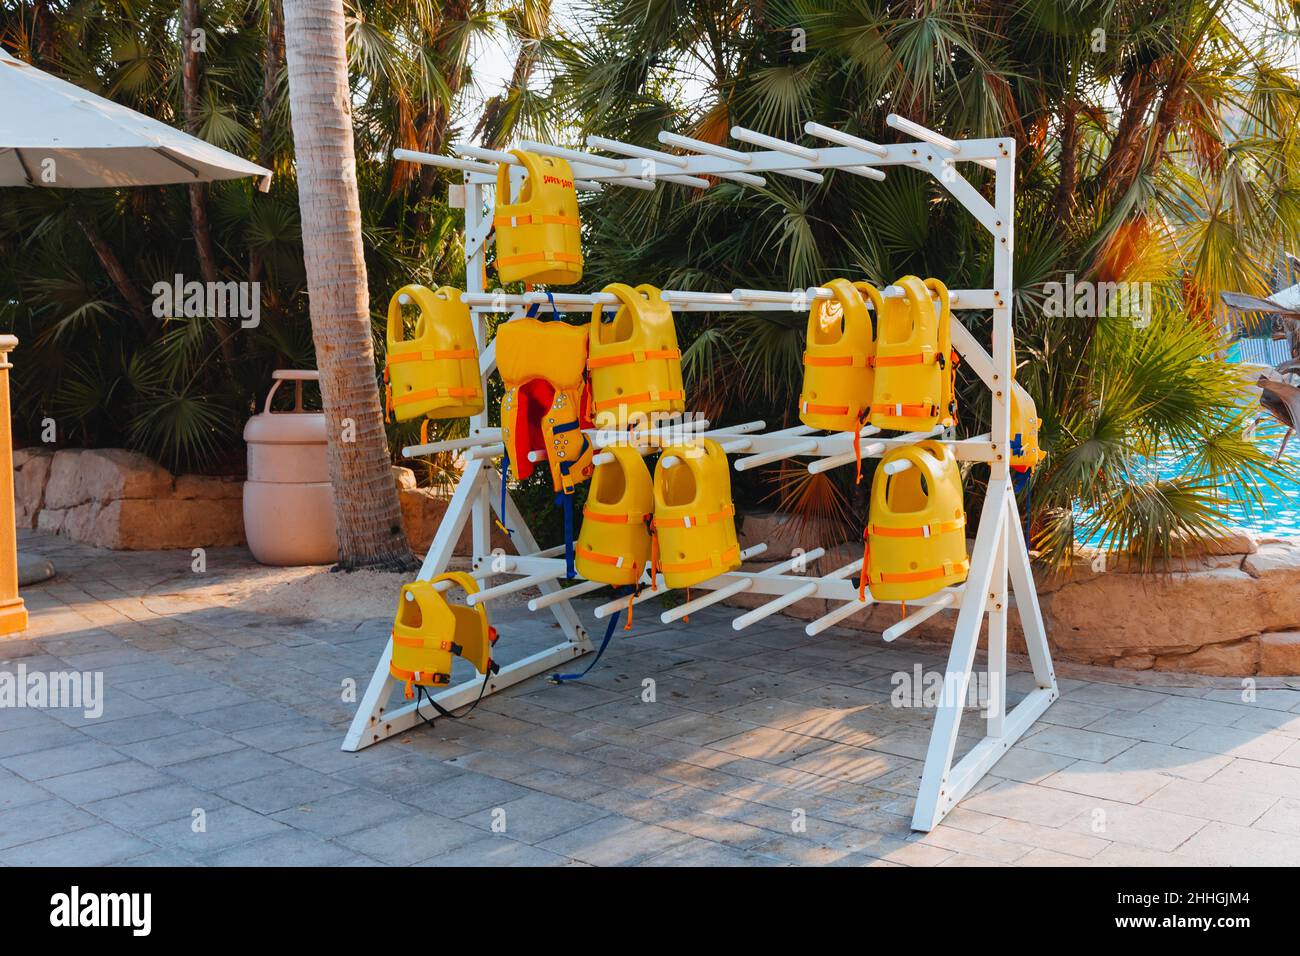 Stack of hanging yellow life vests on hangers outside during the marine activities, safety clothing, protection concept. Stock Photo